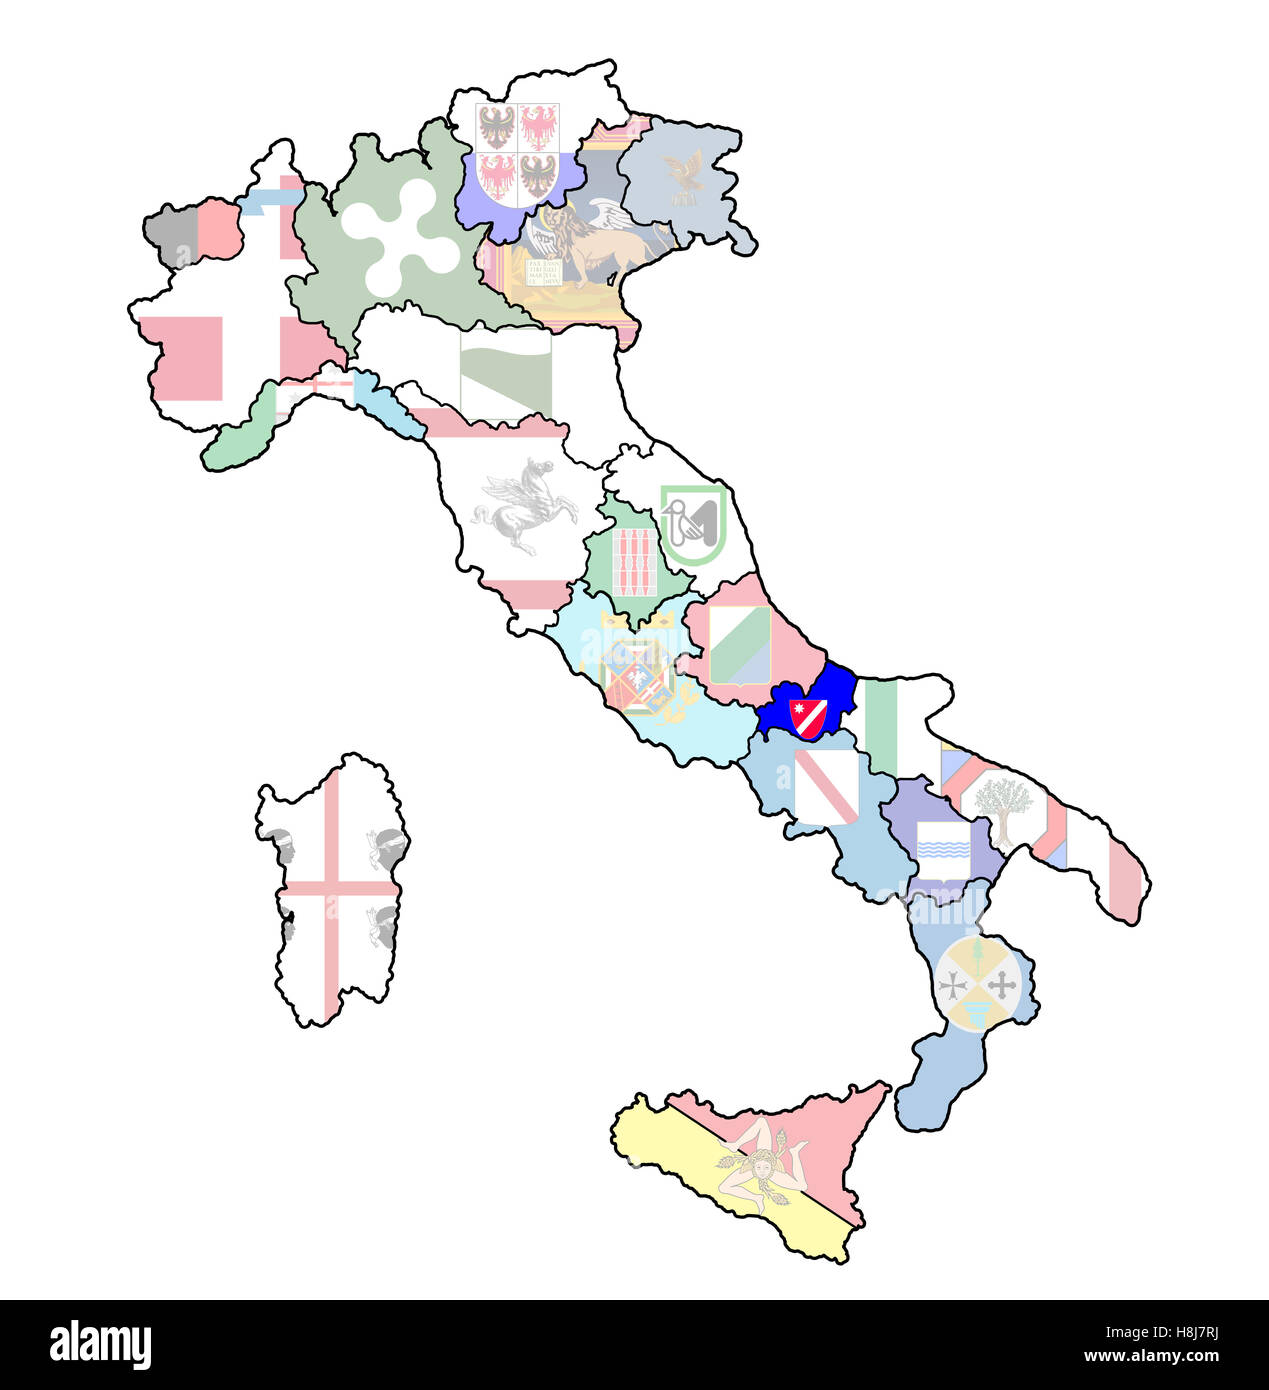 molise region on administration map of italy with flags Stock Photo